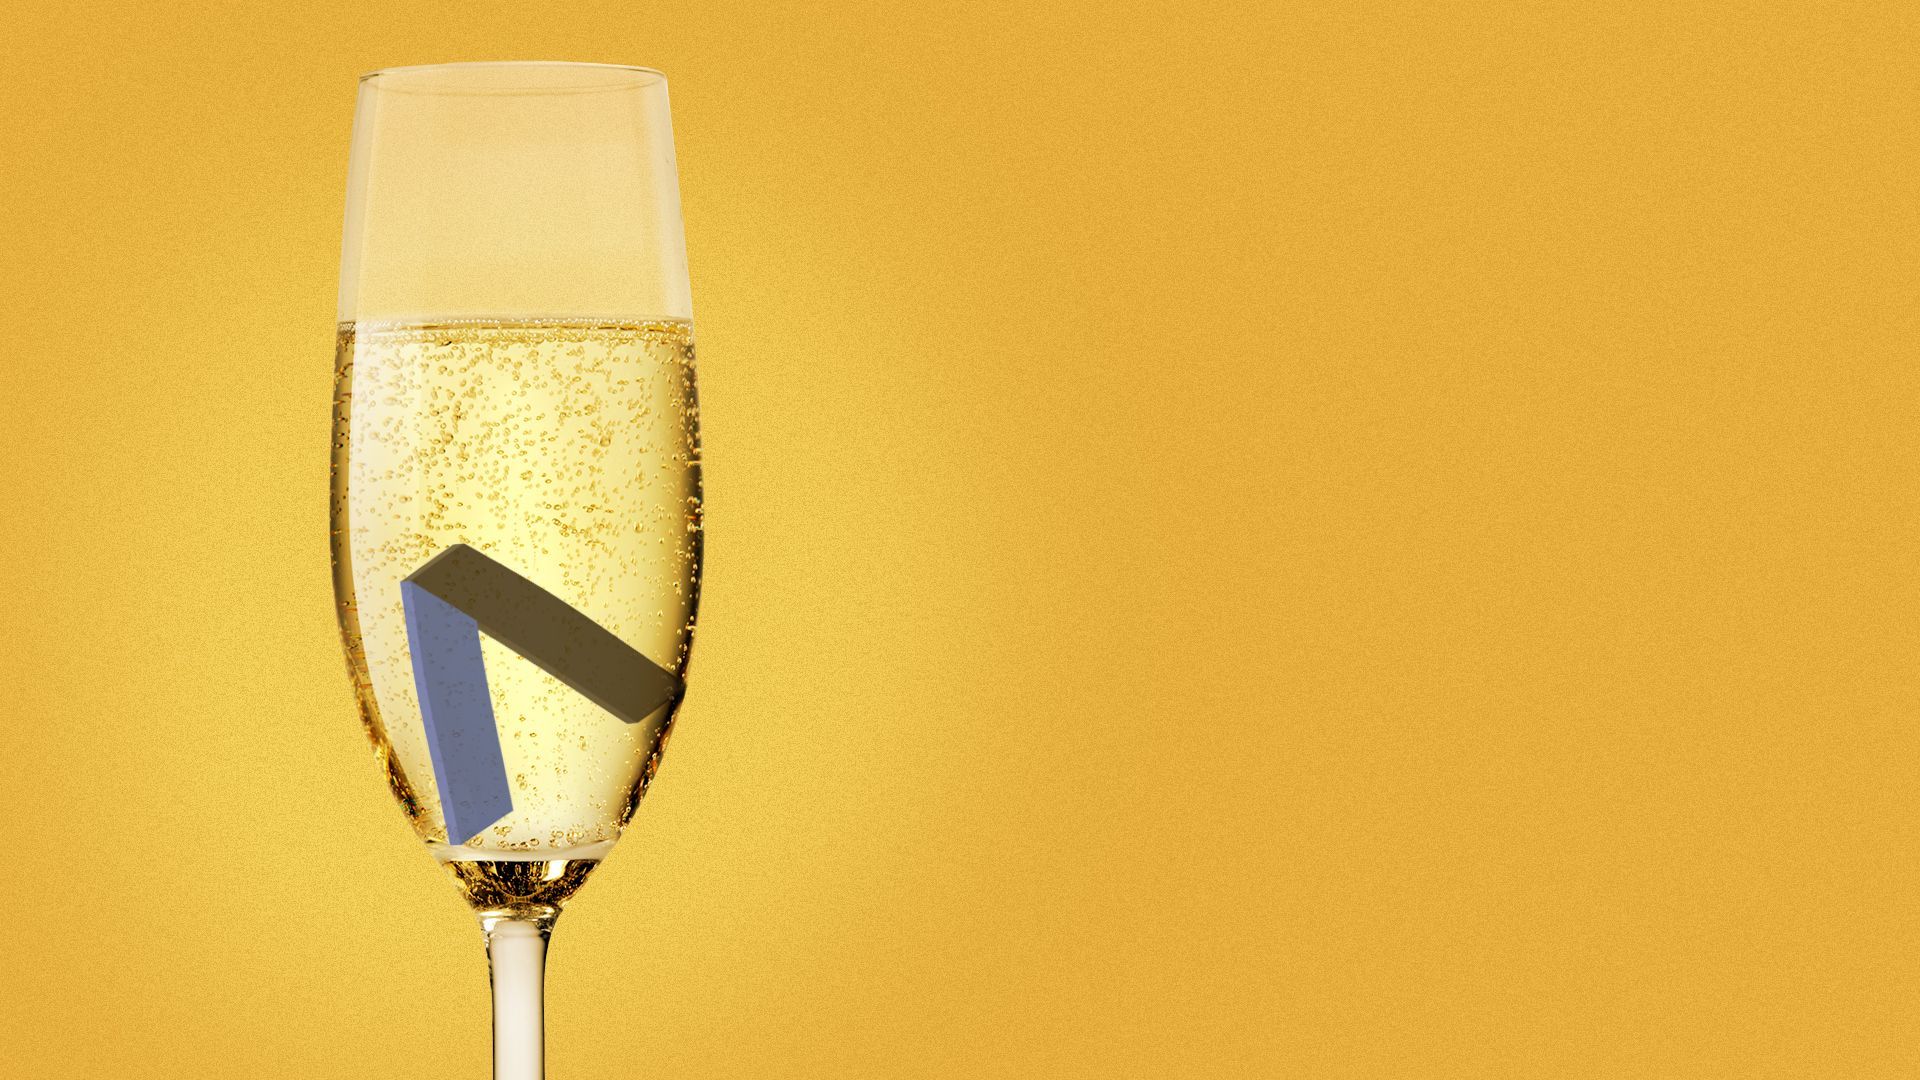 Illustration of the Axios logo in a glass of champagne.